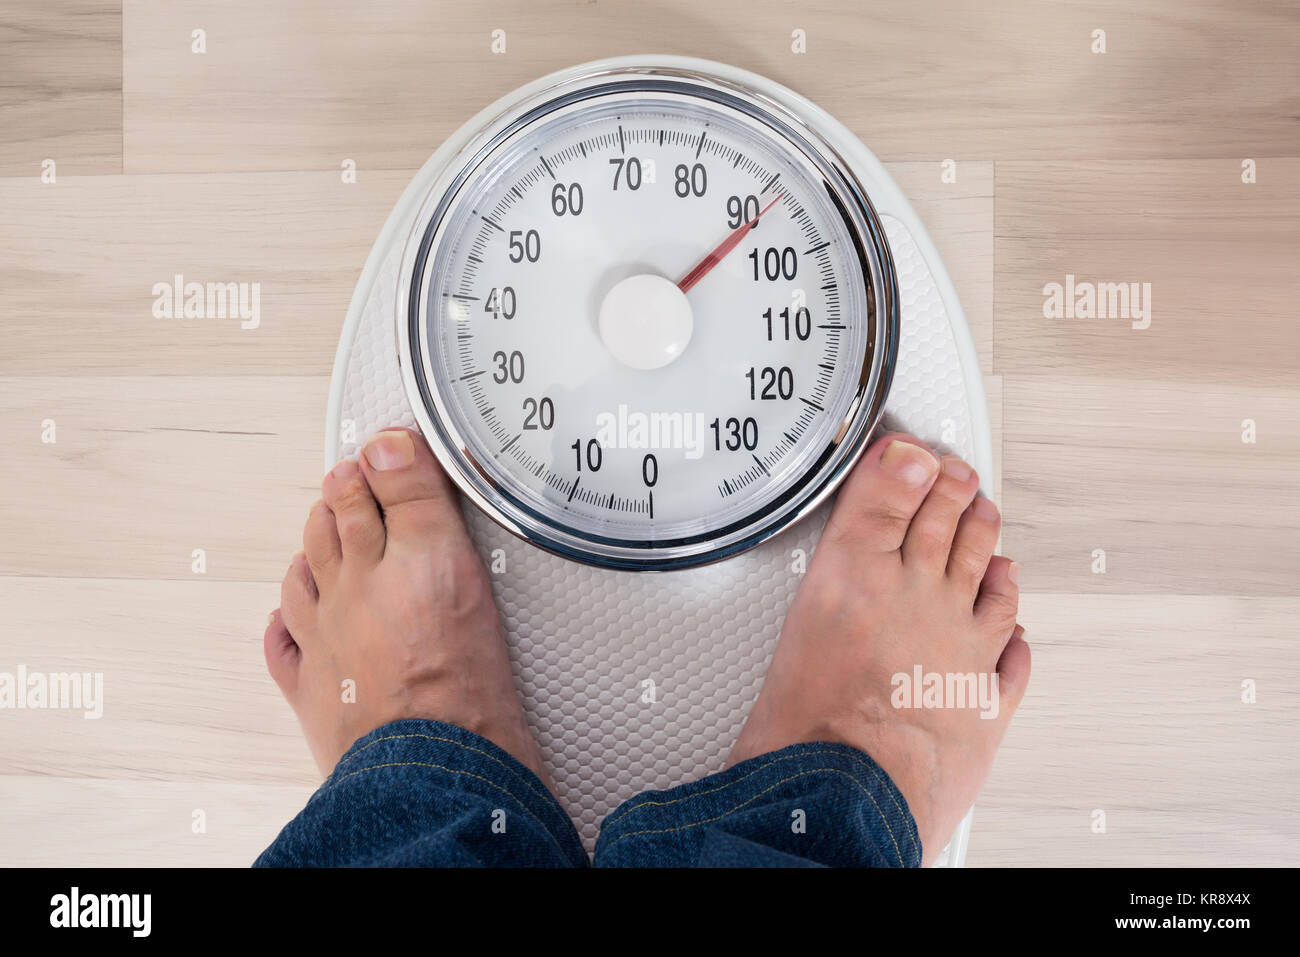 https://c8.alamy.com/comp/KR8X4X/person-standing-on-weighing-scale-KR8X4X.jpg